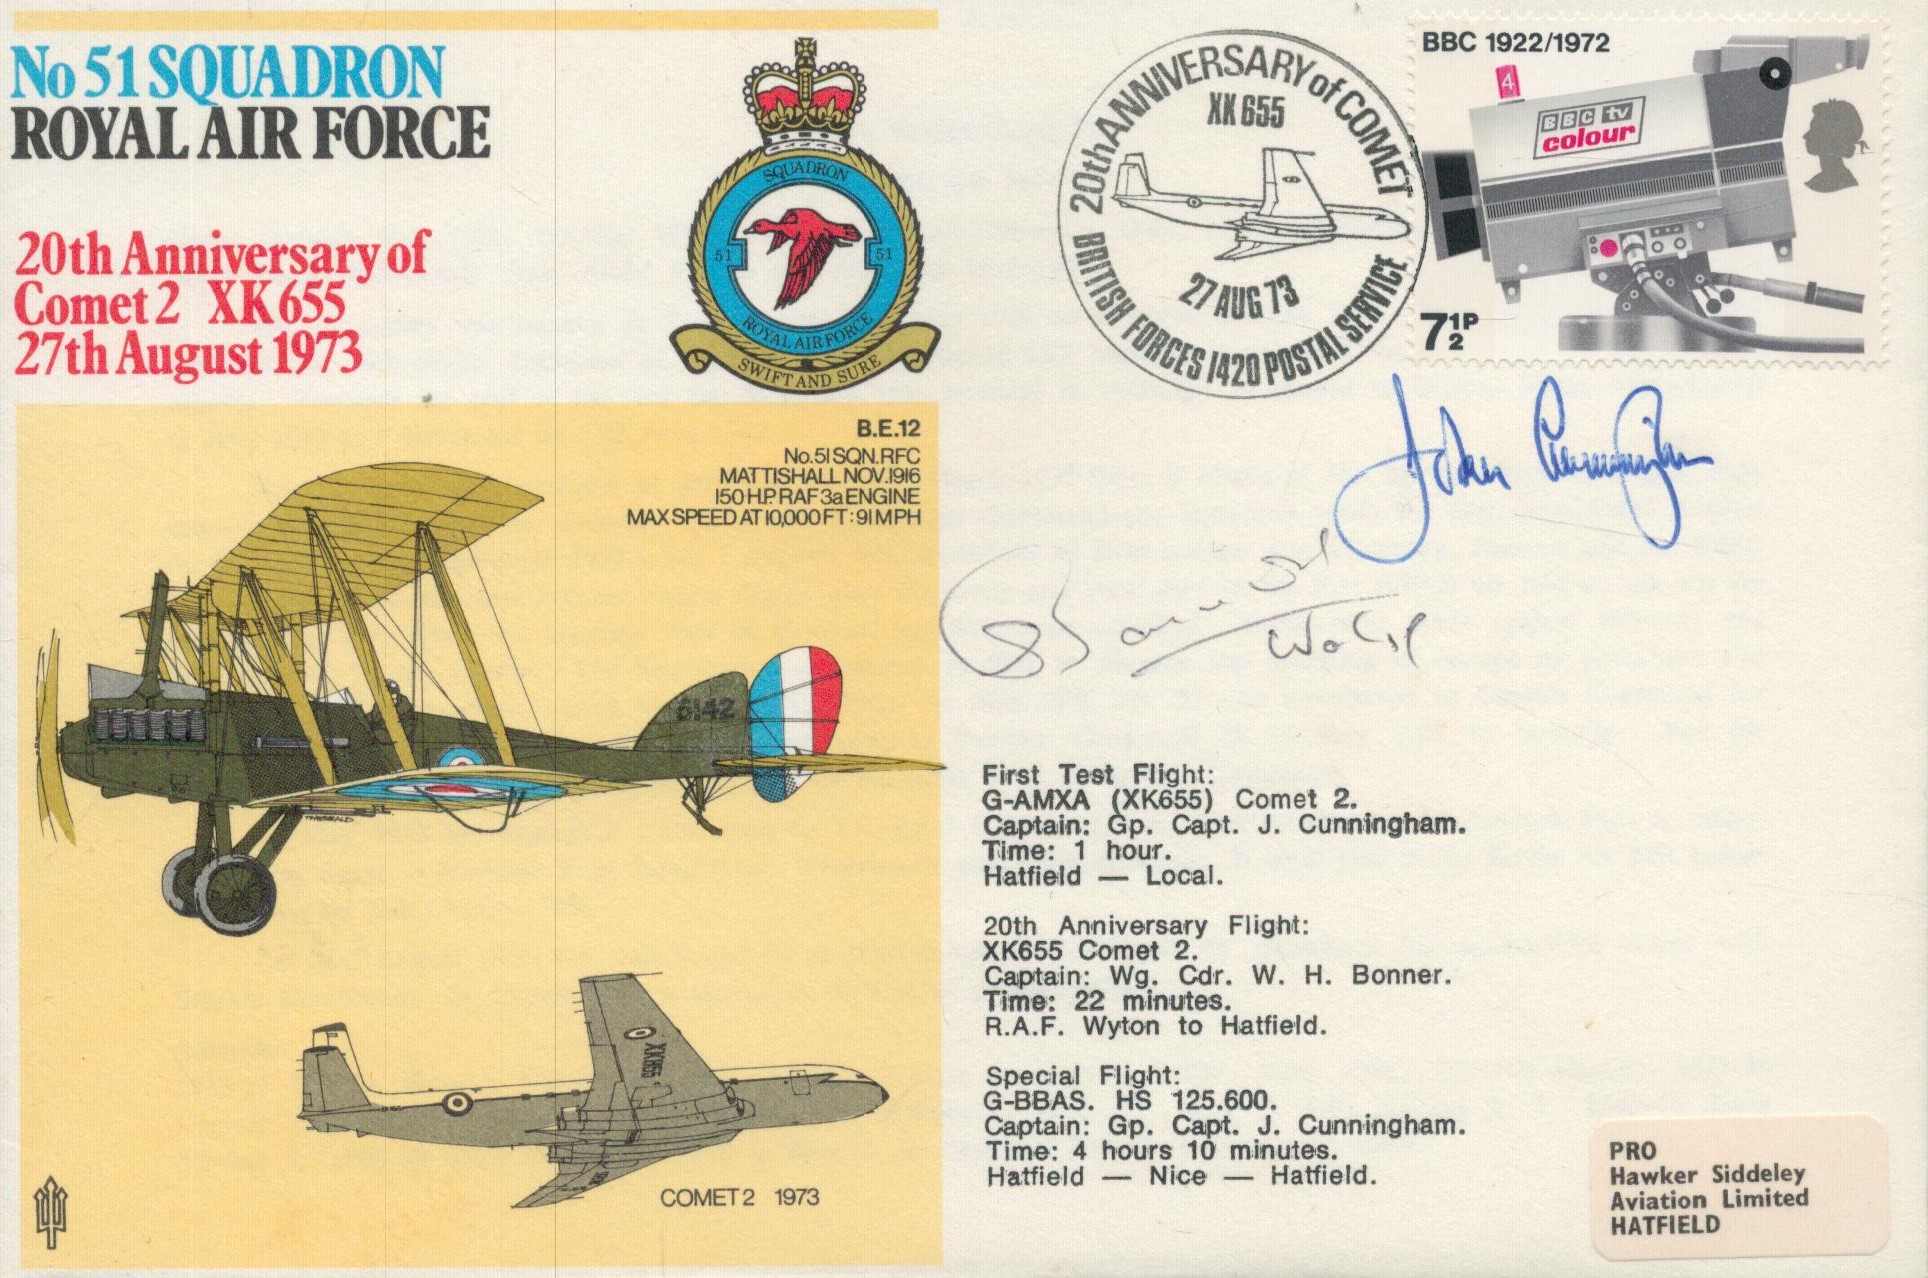 Top Nightfighter John Cunningham DSO DFC WW2 RAF Battle of Britain fighter ace signed 1973, 51 sqn